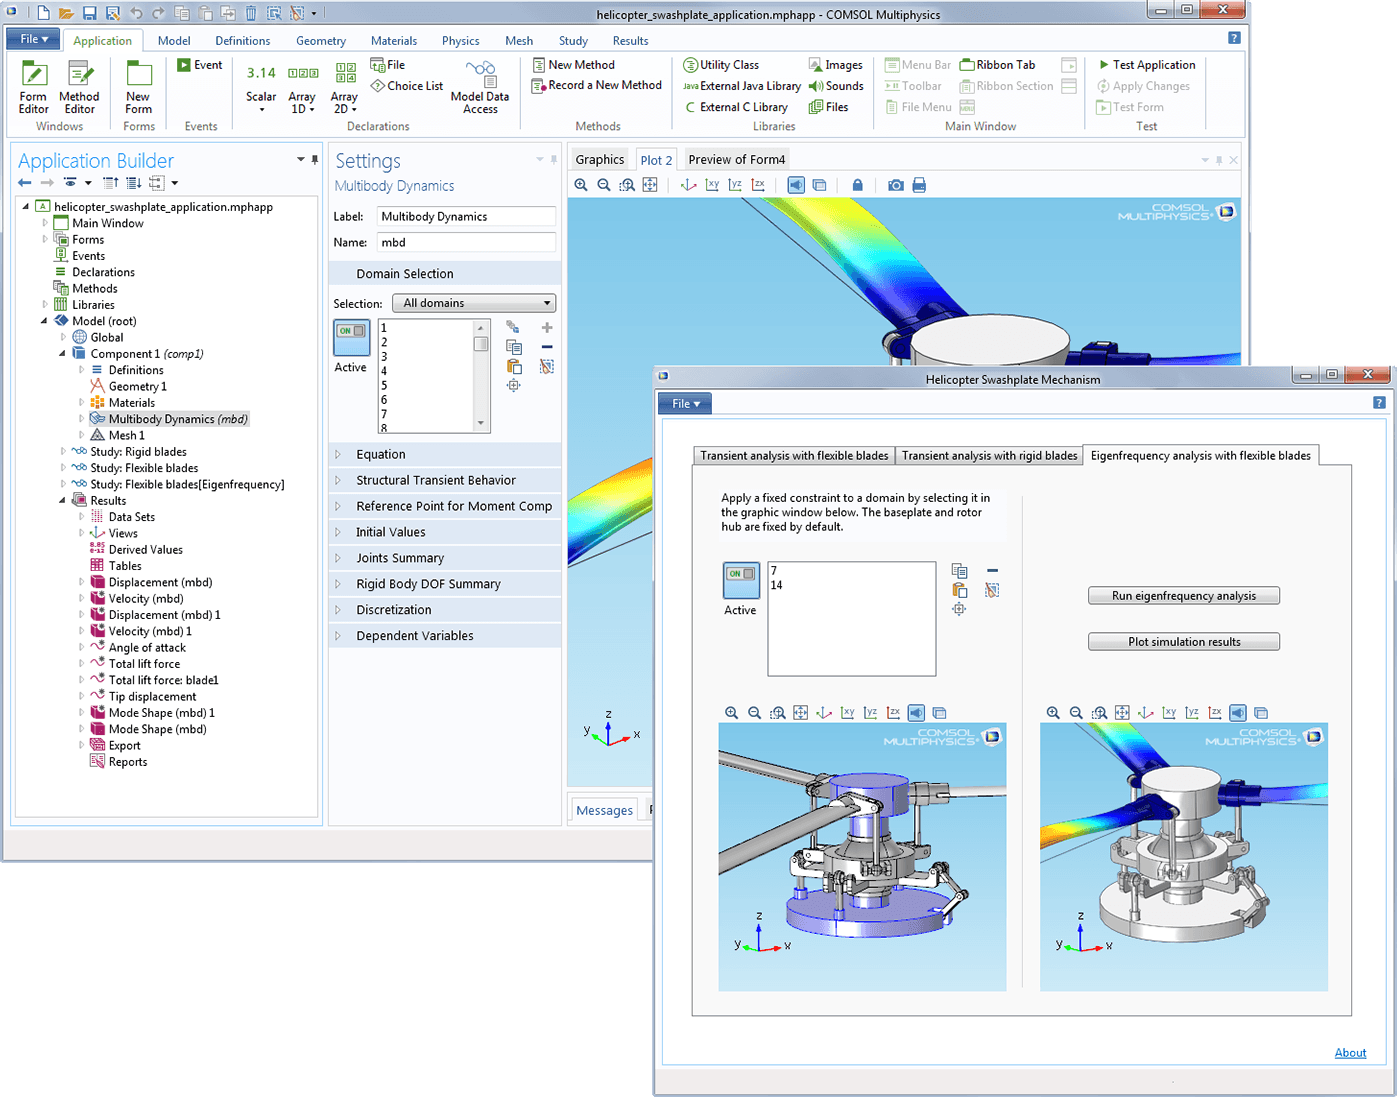 A swashplate mechanism is used to control the orientation of helicopter rotor blades. This example shows an application derived from the model where only the pitch of the blades can be changed, but where both transient and eigenfrequency analyses can be presented.